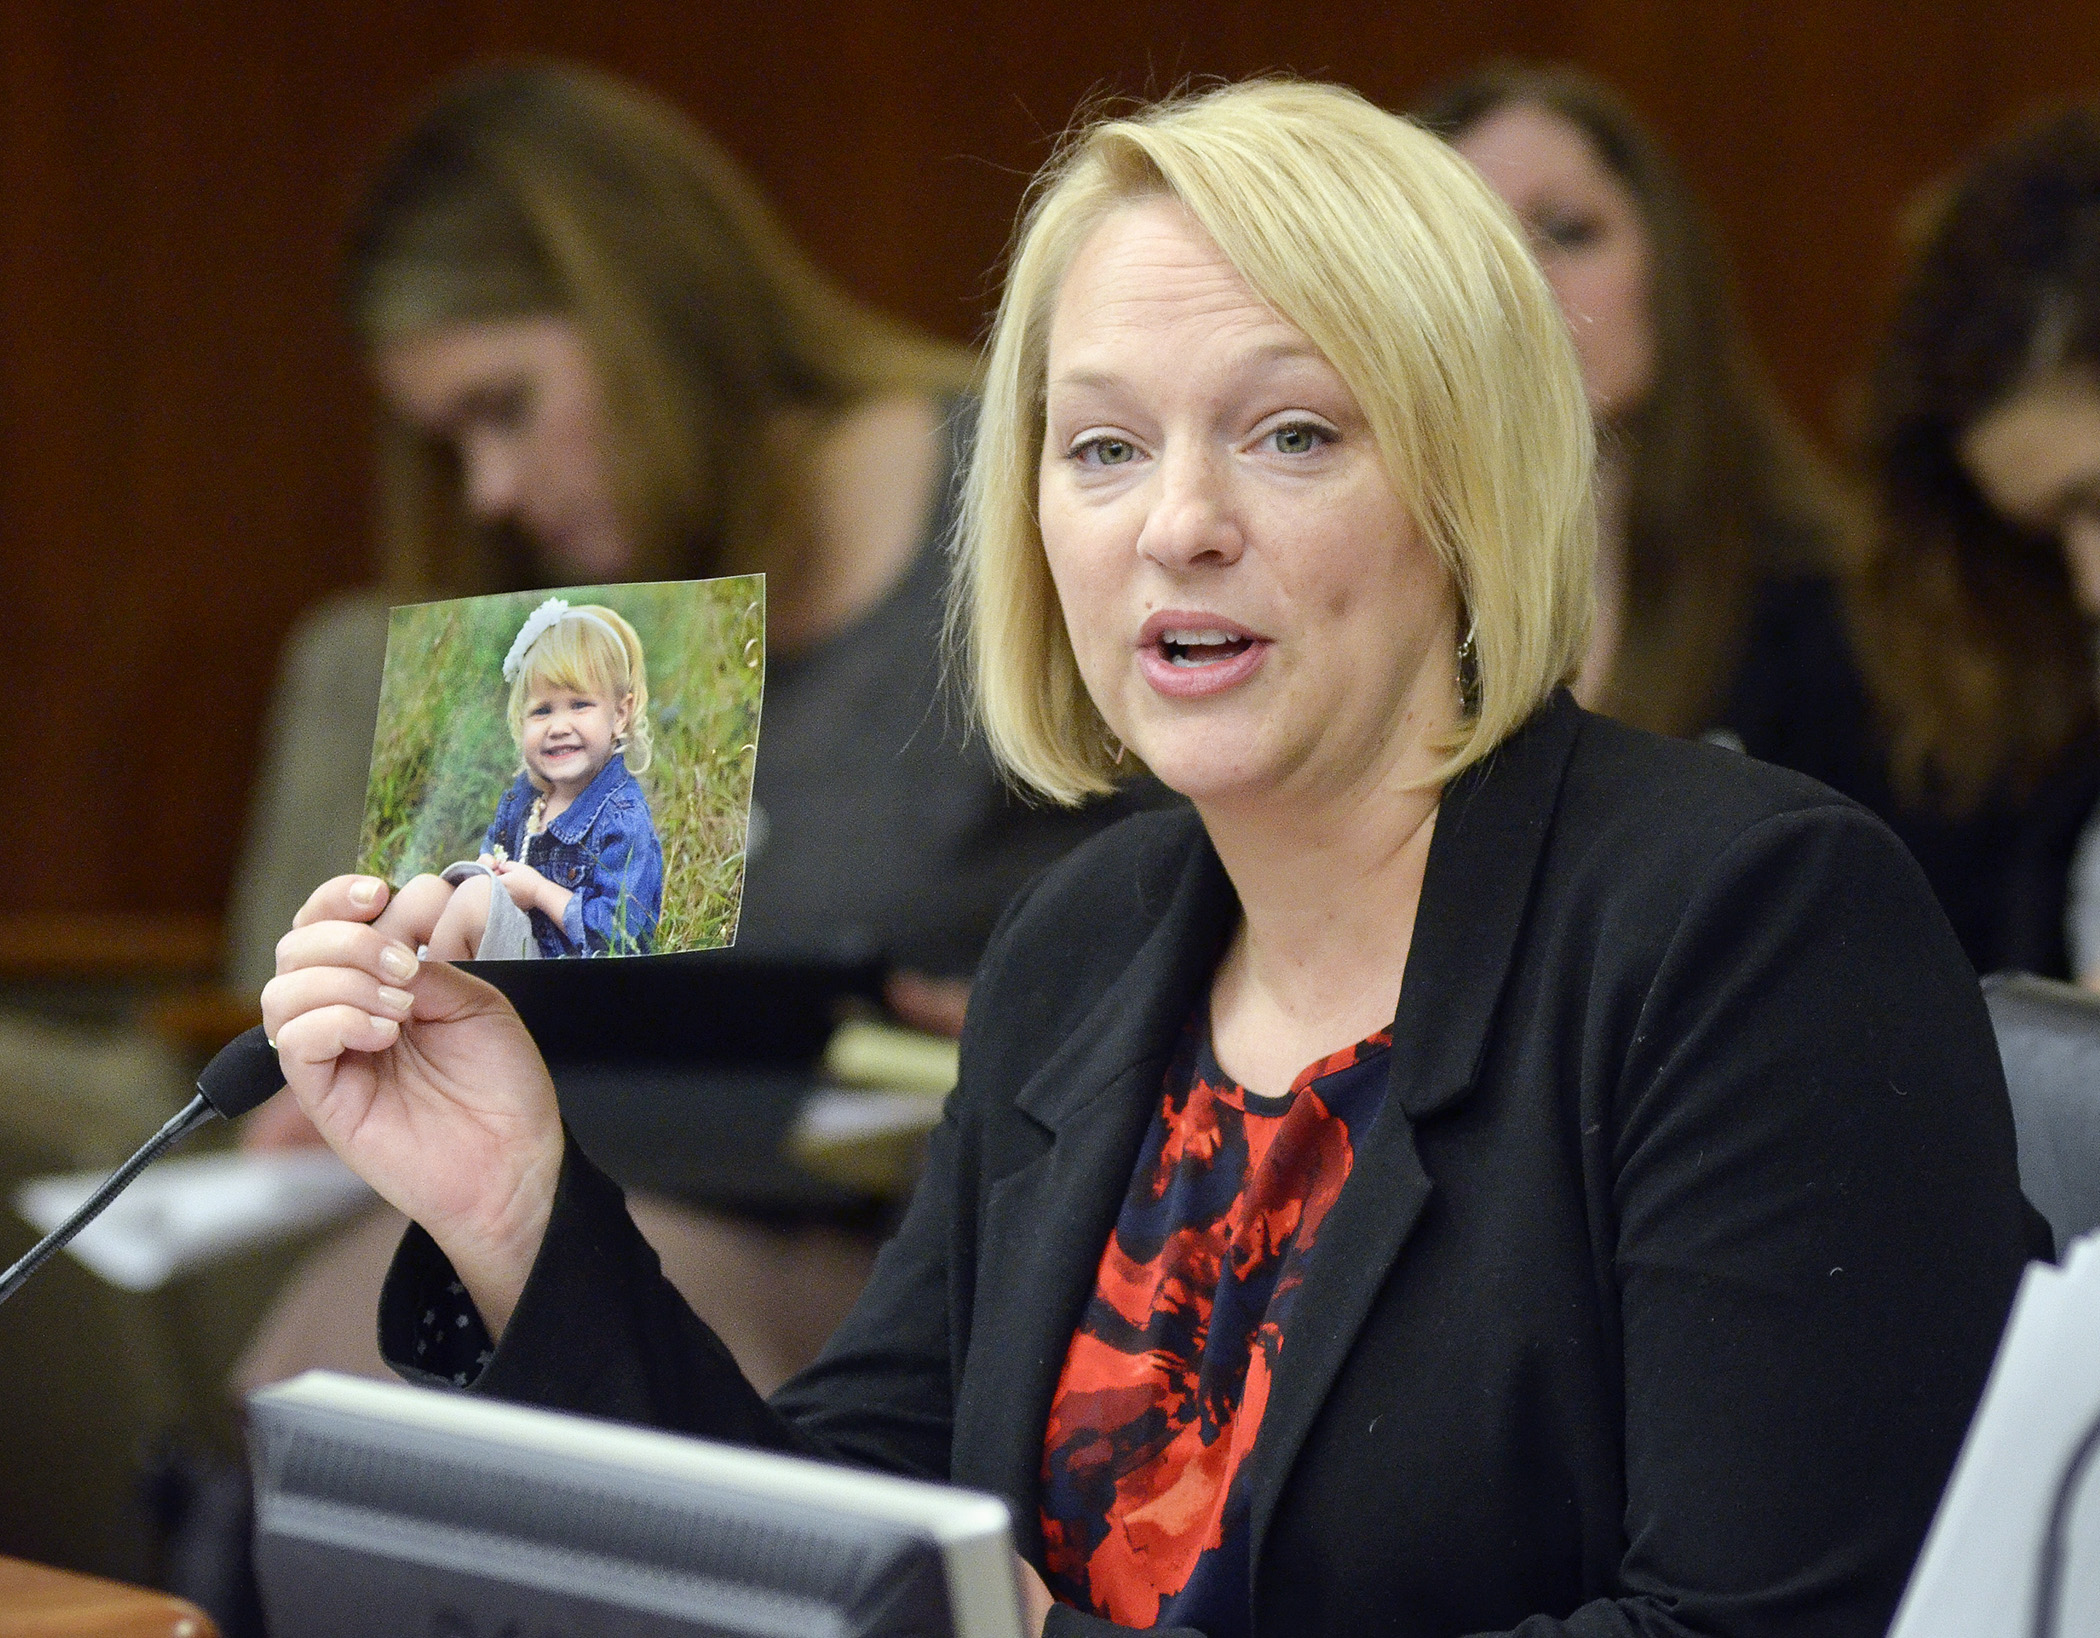 Nicole Monacell, who used the services of a surrogate mother, displays a photo of Payton Cecelia Monacell while testifying before the House Civil Law and Data Practices Committee March 5 in opposition to a bill that would establish a Legislative Surrogacy Commission. Photo by Andrew VonBank